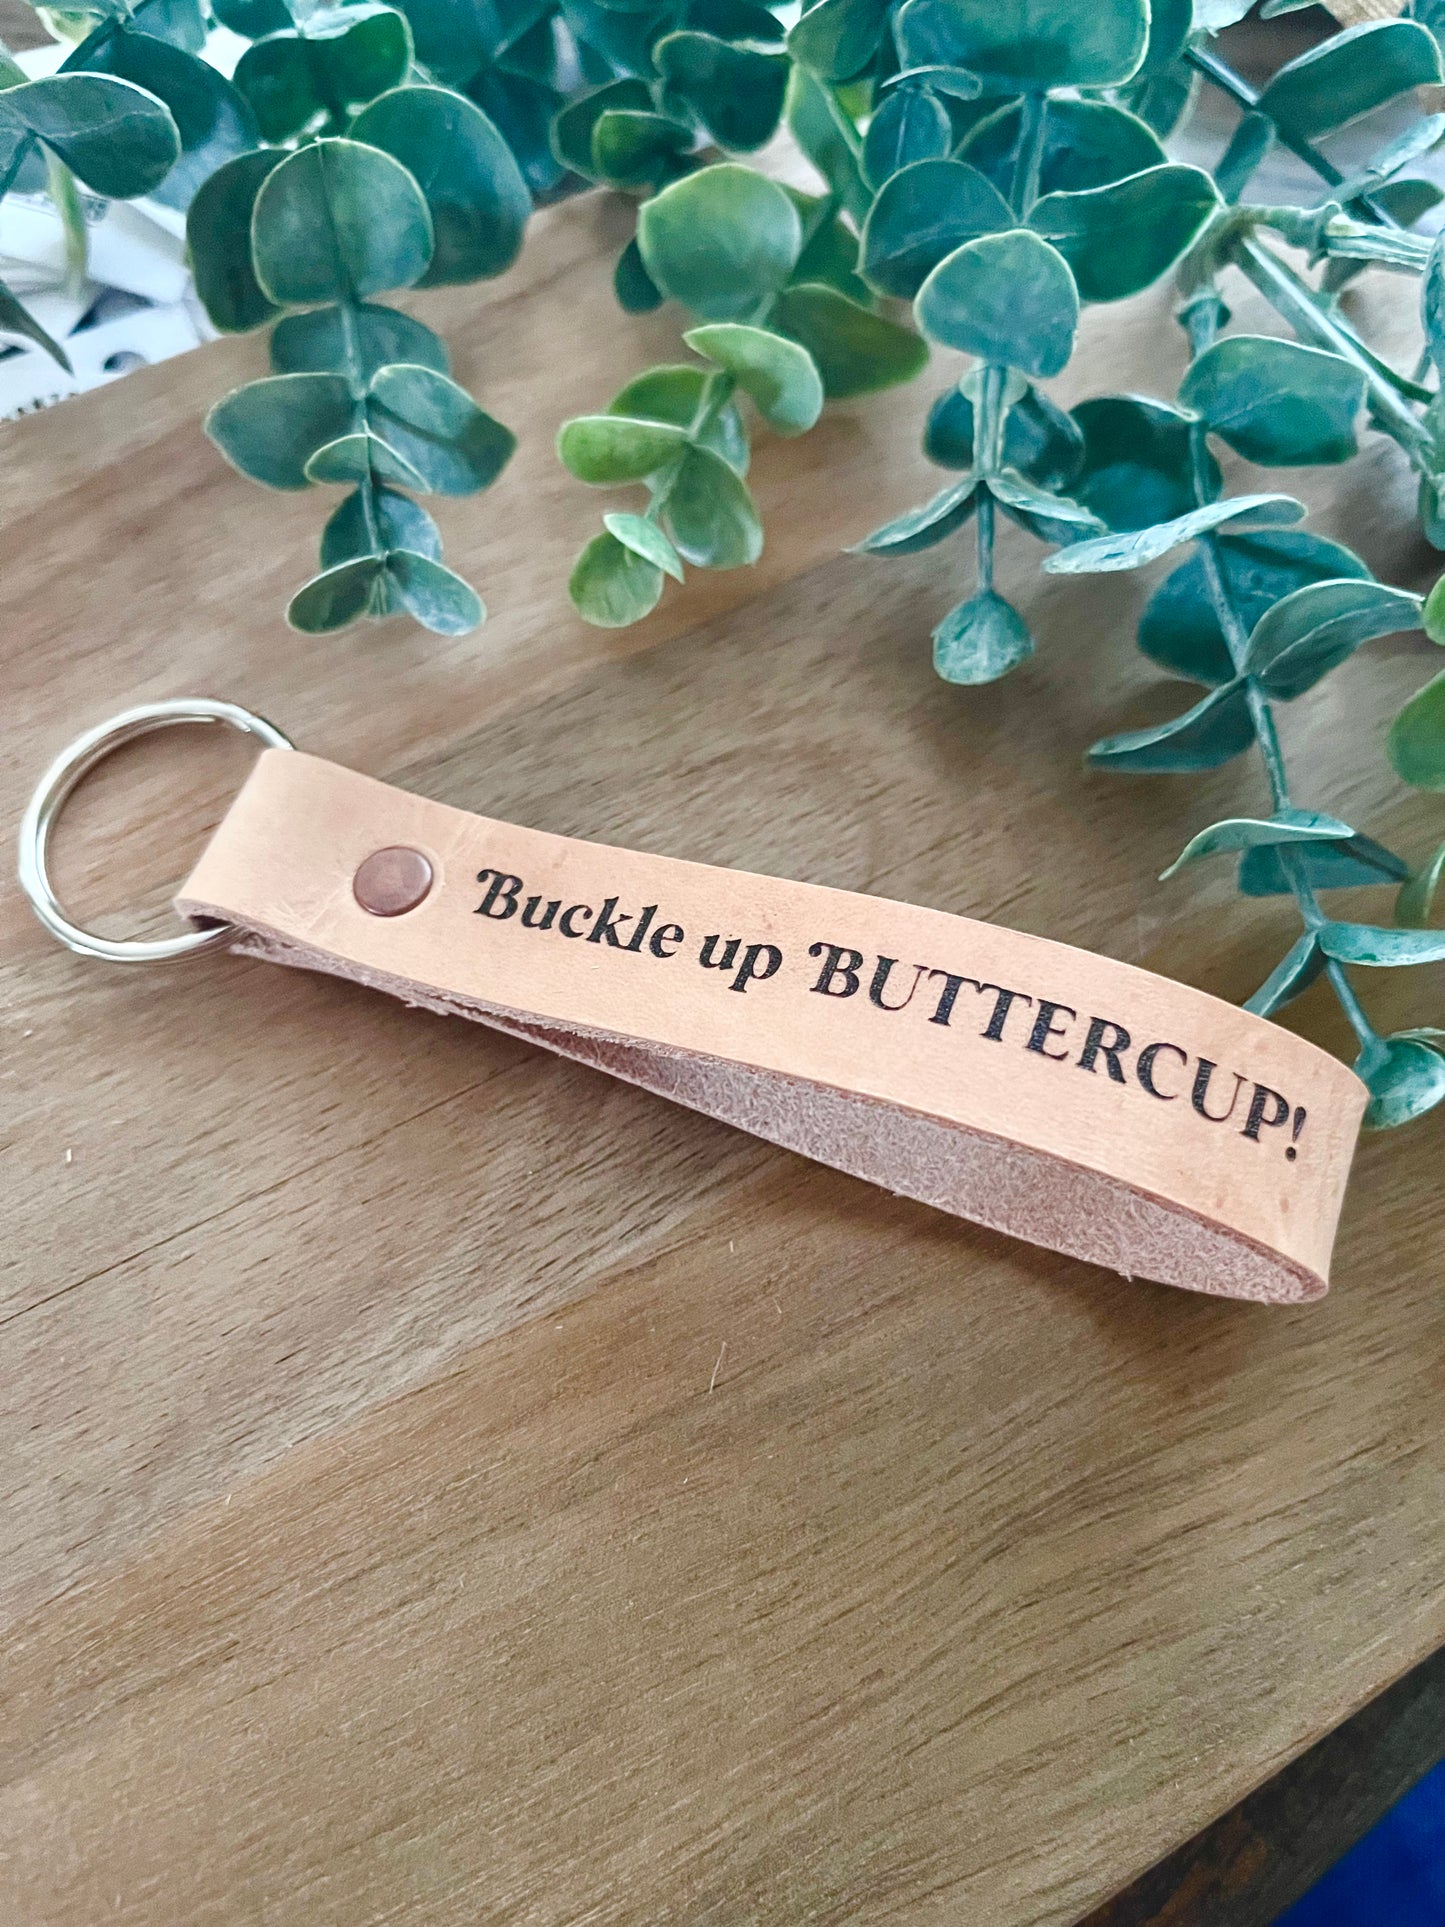 Buckle up Buttercup! - Genuine Leather Keychain